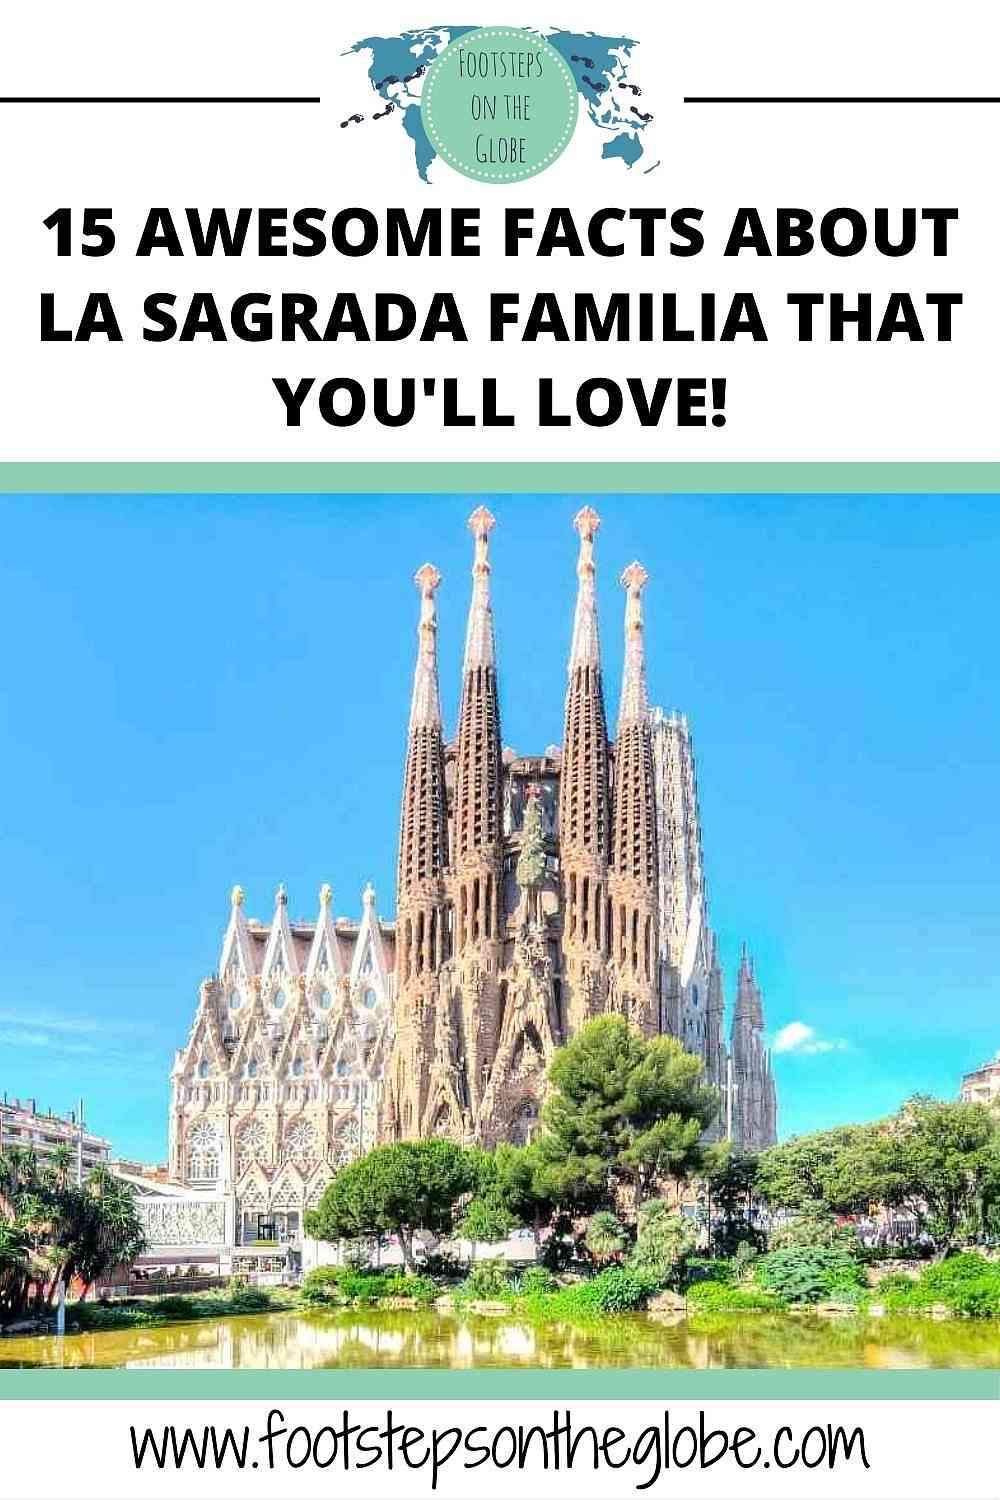 Pinterest image of the outside of Sagrada Familia, a gothic cathedral in Barcelona with the text: "15 Awesome facts about Sagrada Familia that you'll love!"